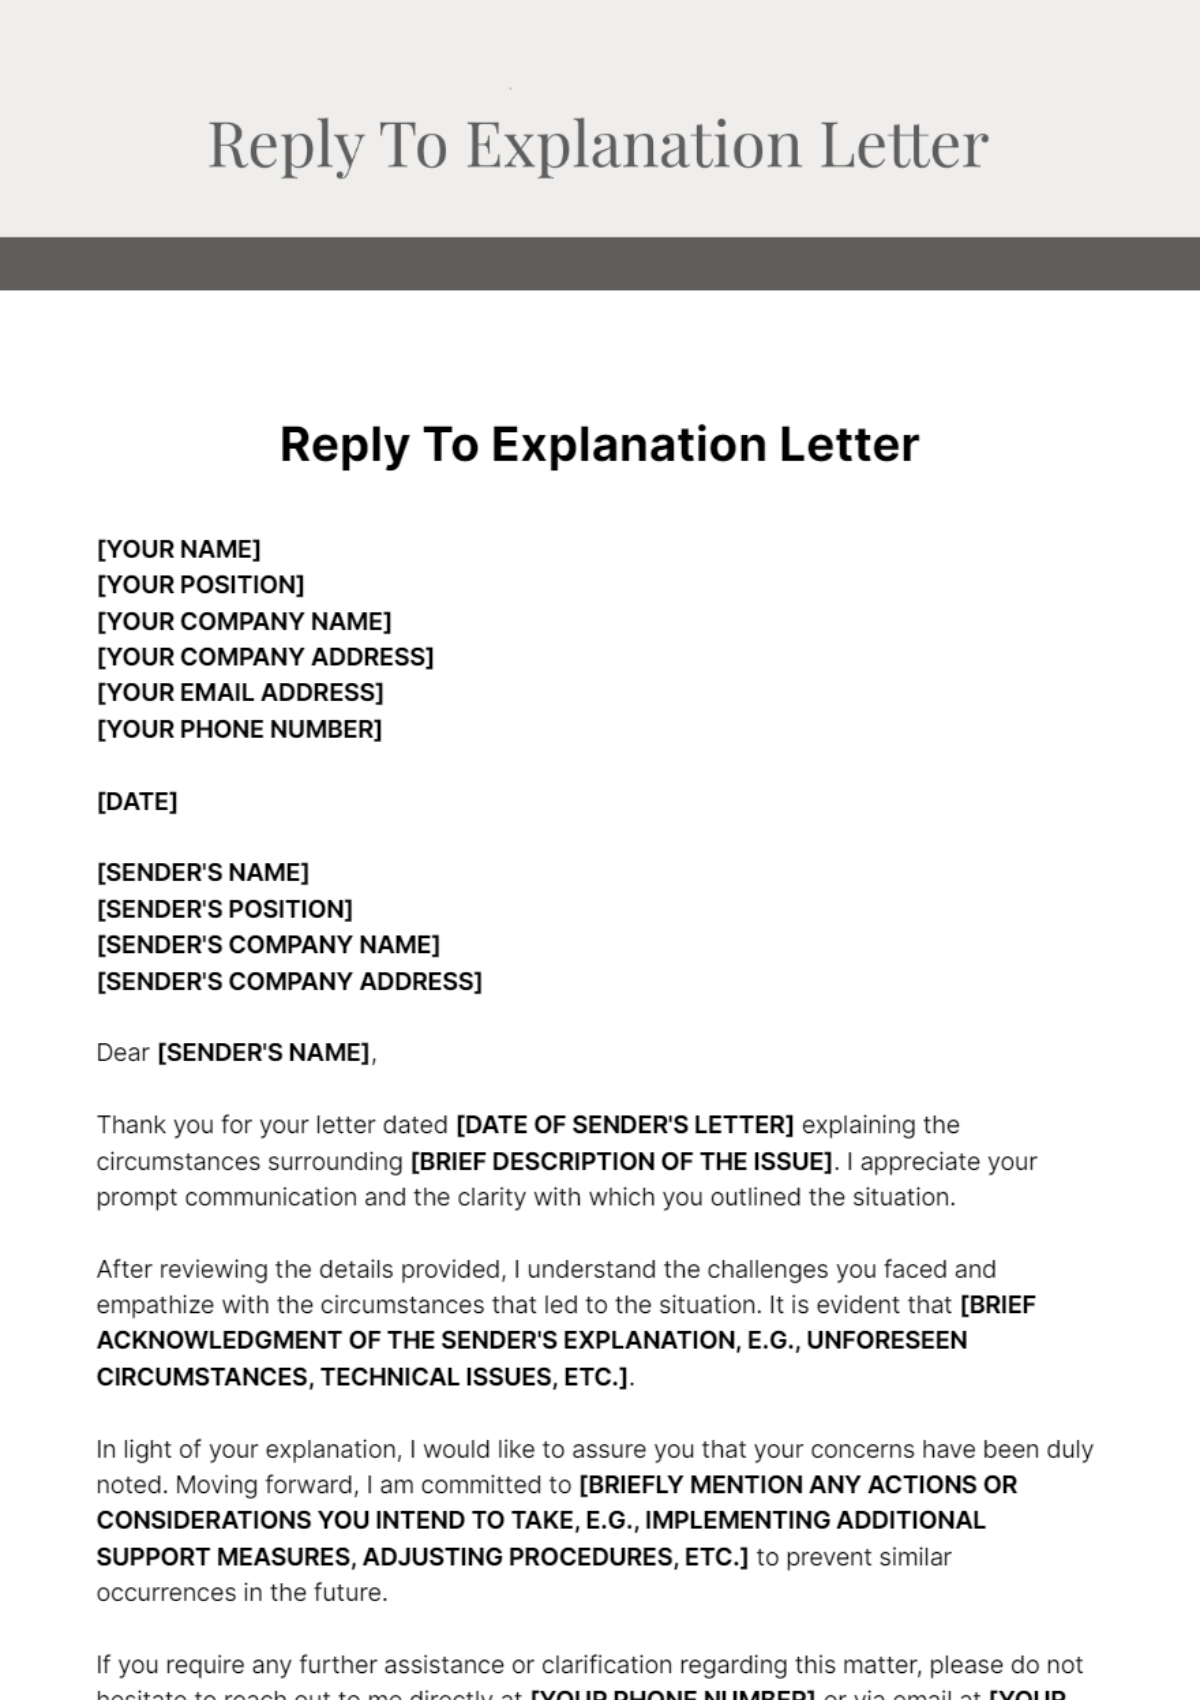 Reply To Explanation Letter Template